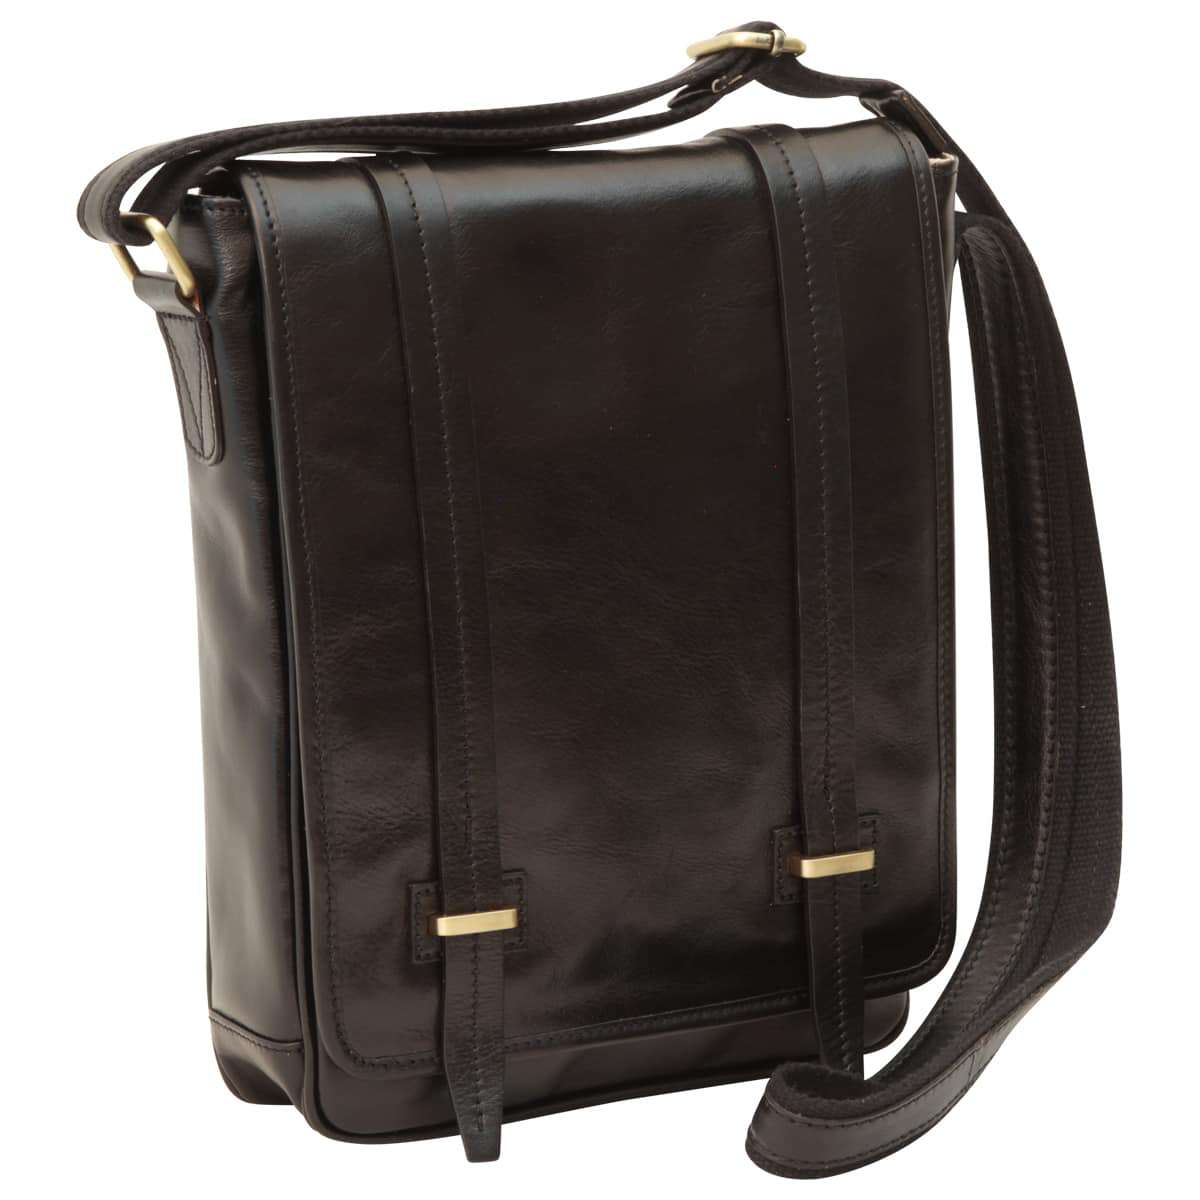 Medium leather bag with double magnetic closure - Black | 406589NE | EURO | Old Angler Firenze